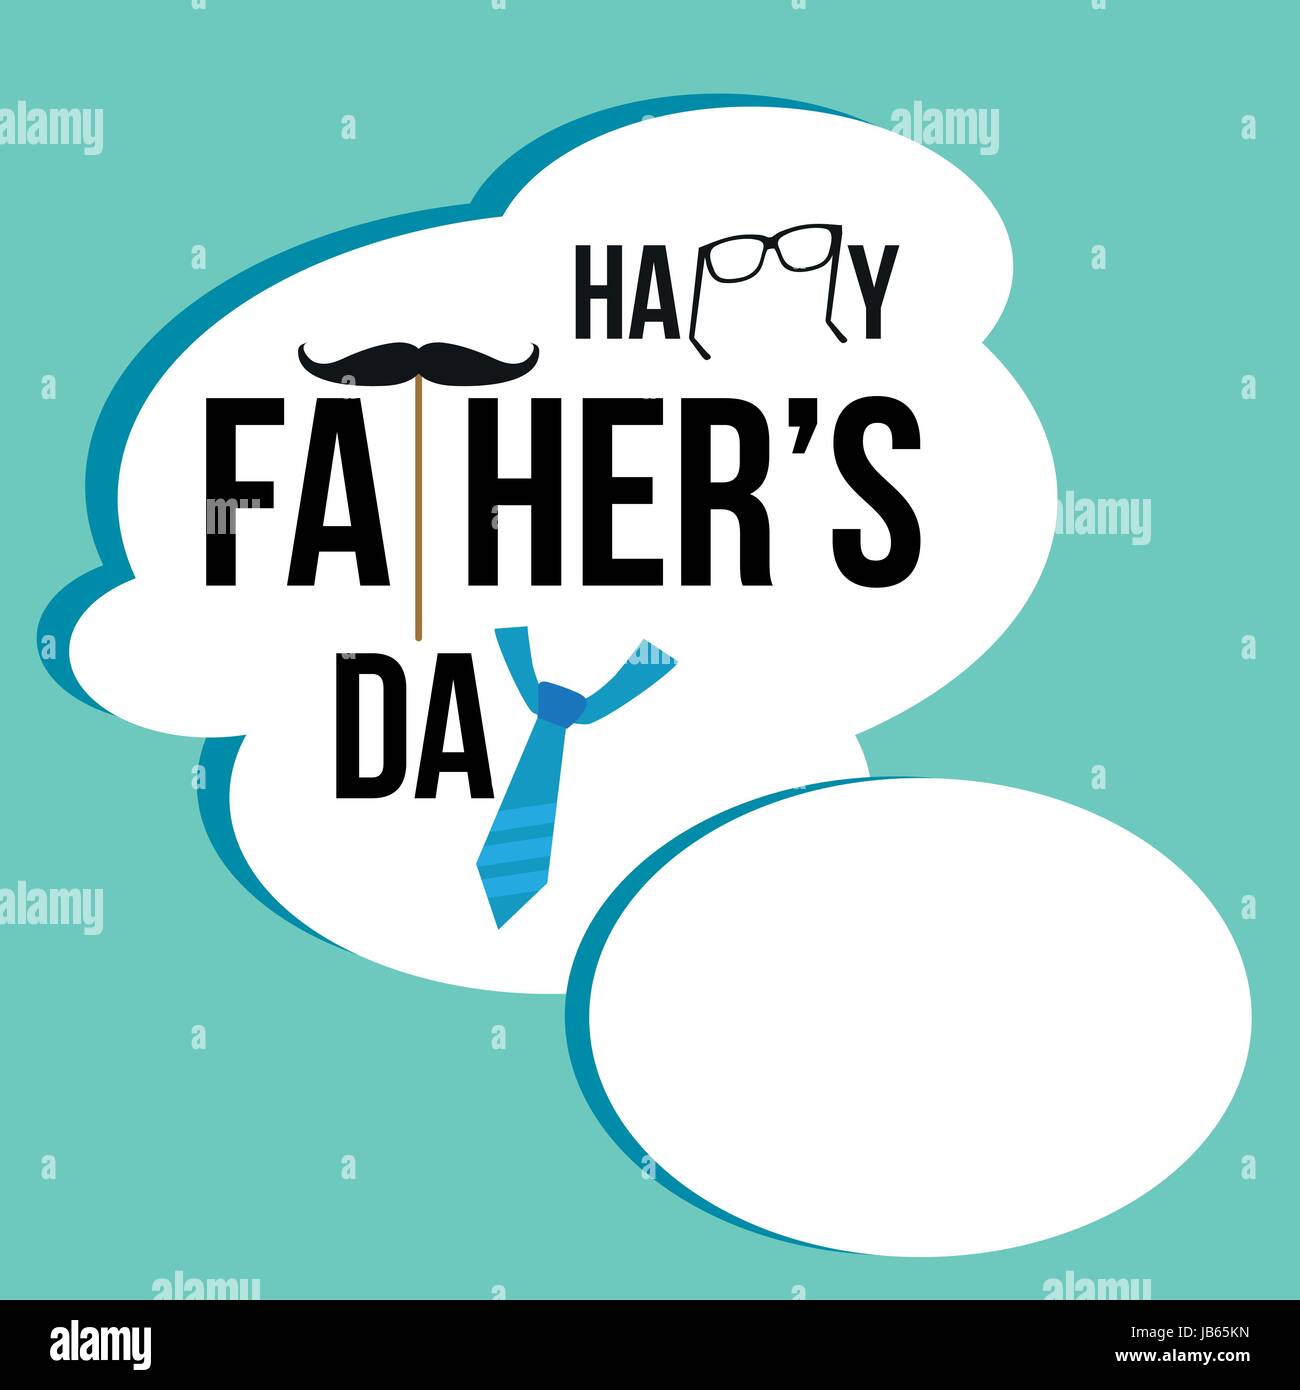 Happy Fathers Day greetingcard, vector illustration. Stock Vector